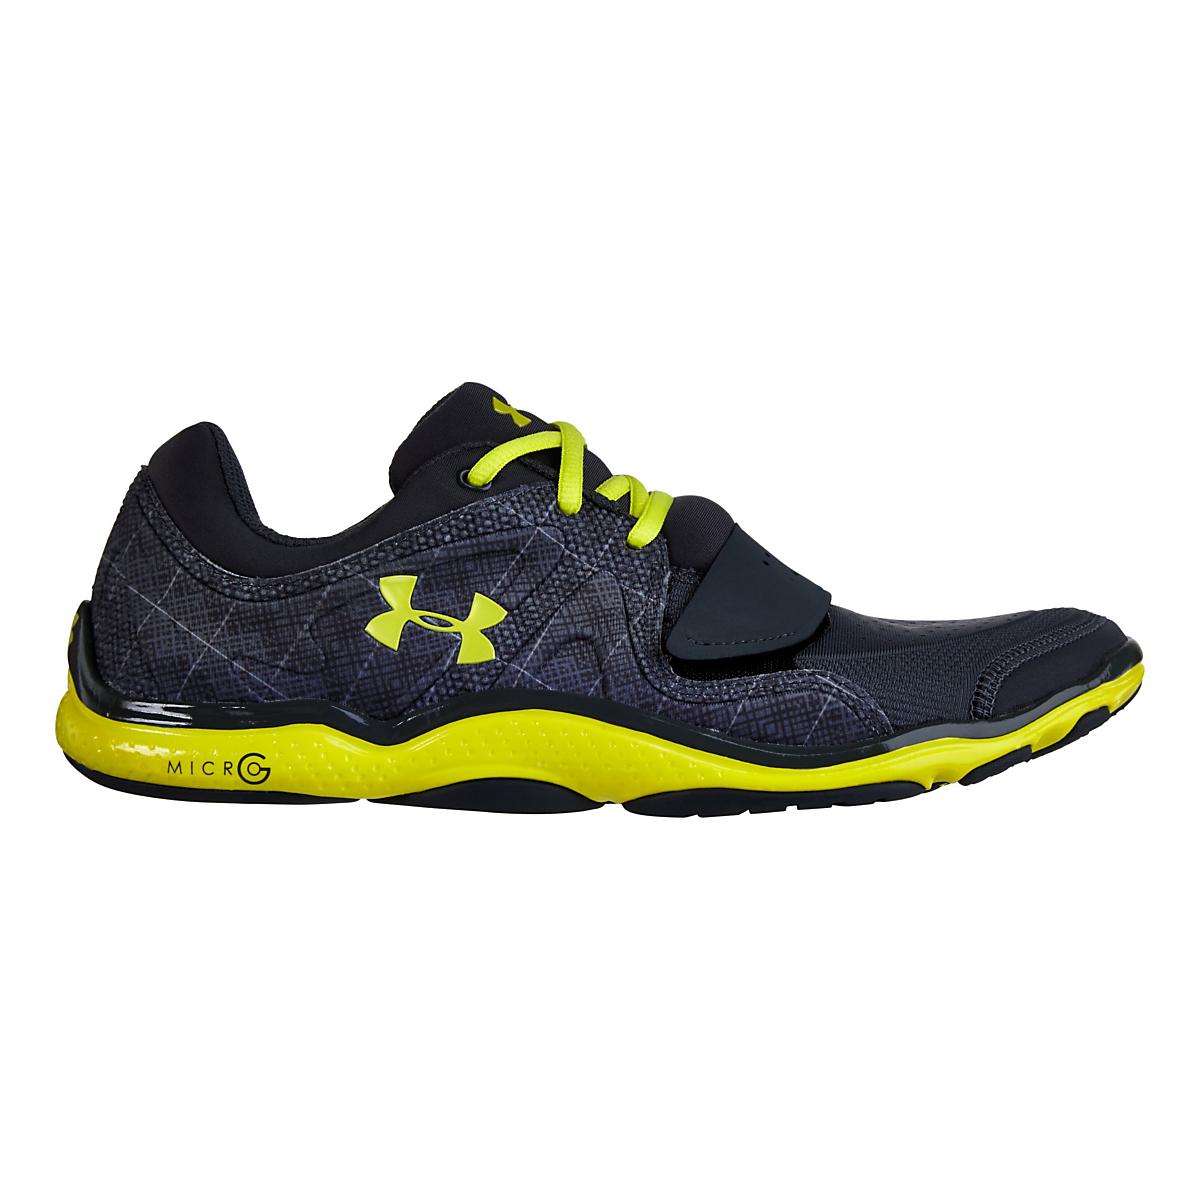 Womens Under Armour Micro G Renegade Cross Training Shoe at Road Runner ...